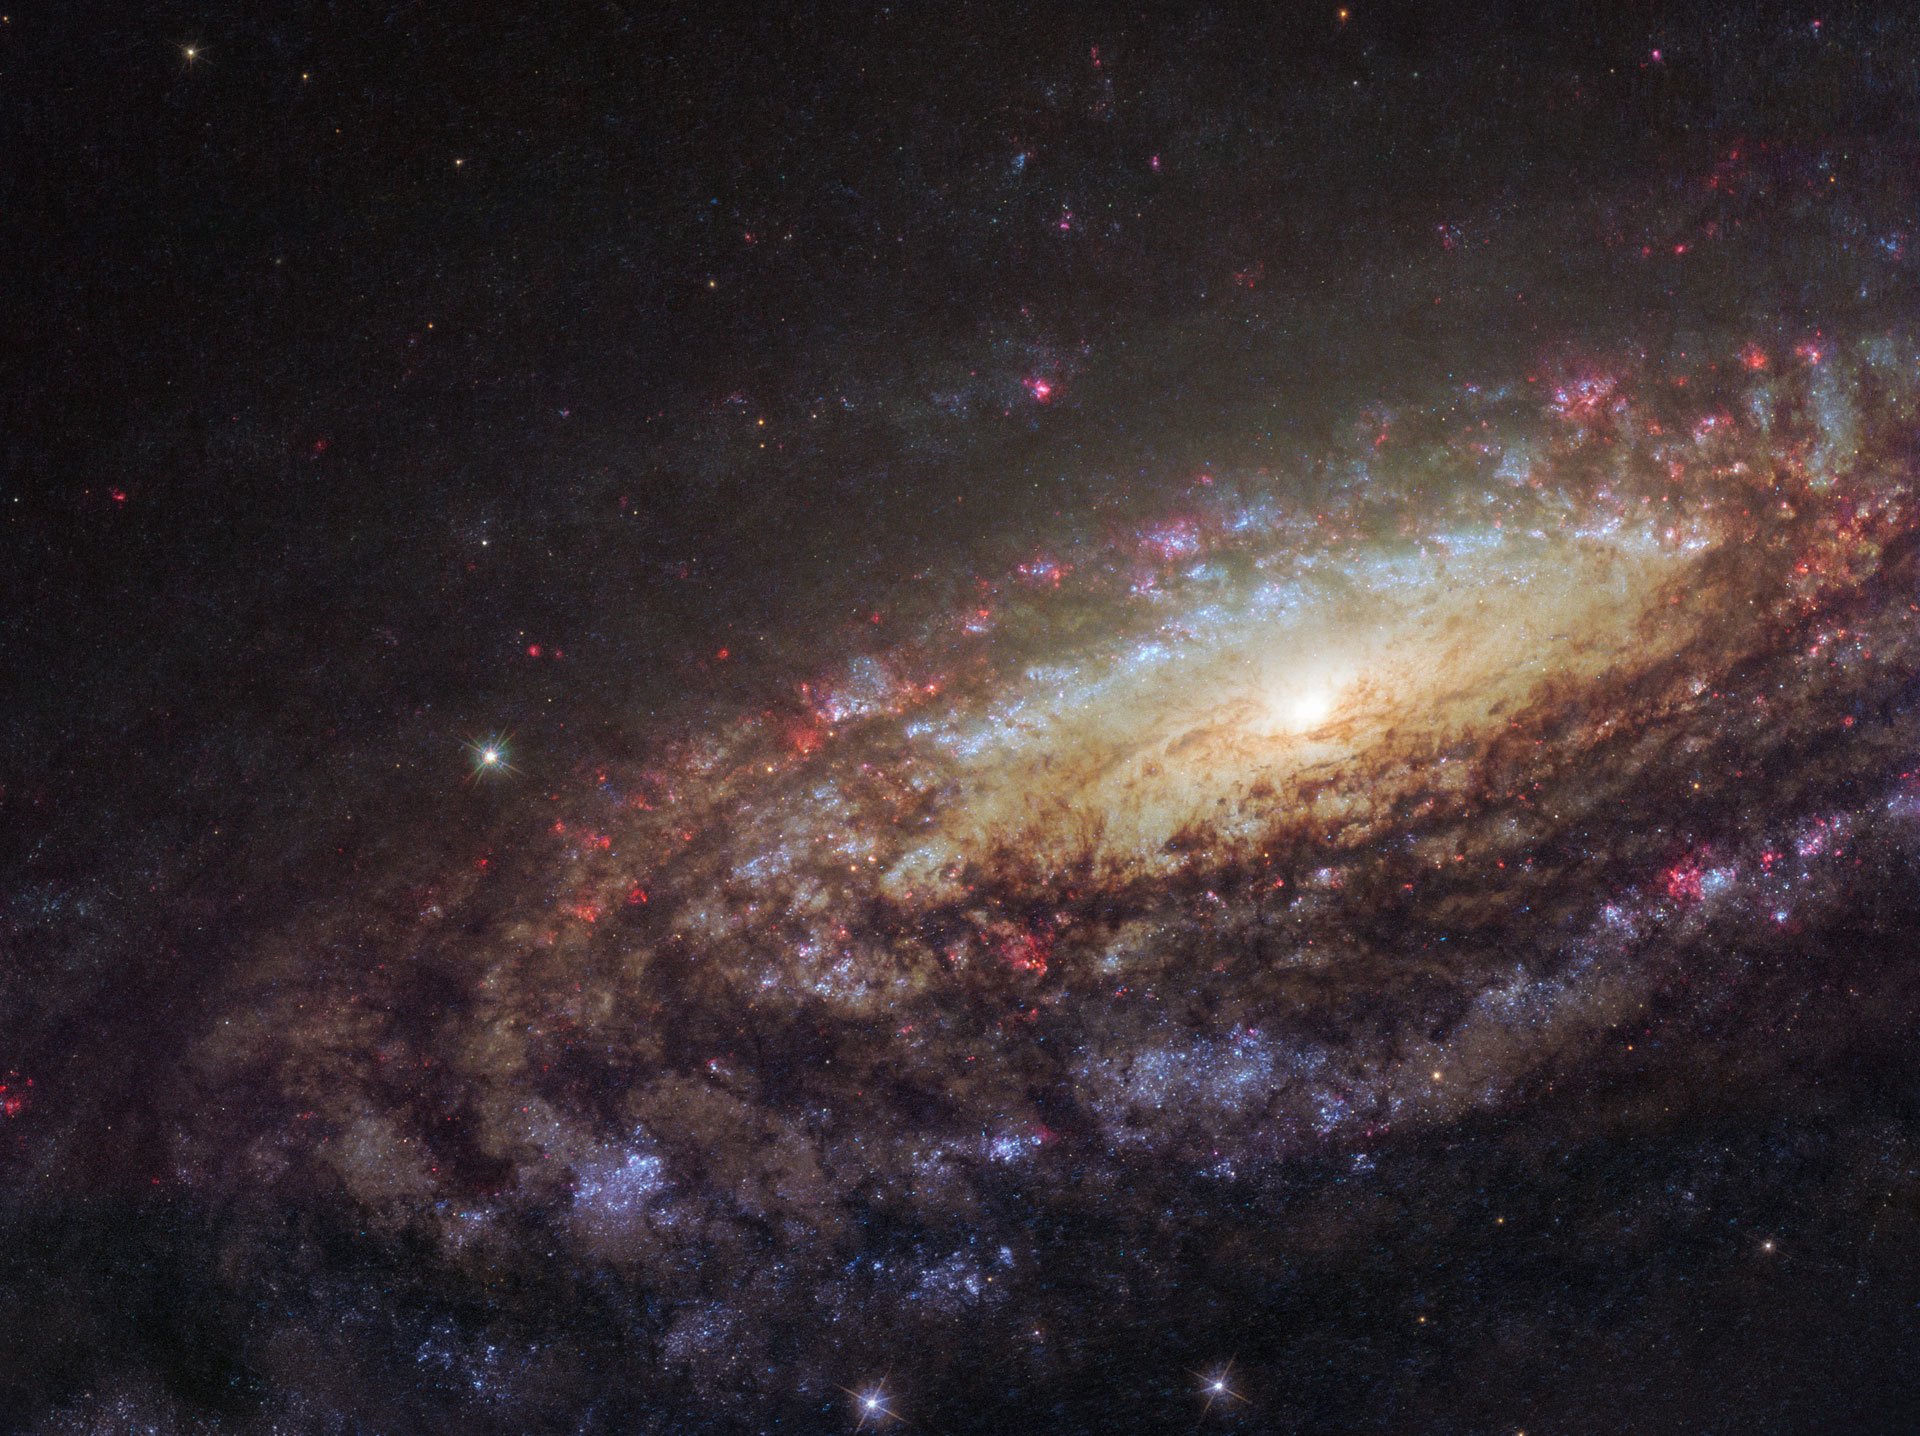 Breathtaking Hubble Image of Spiral Galaxy NGC 7331